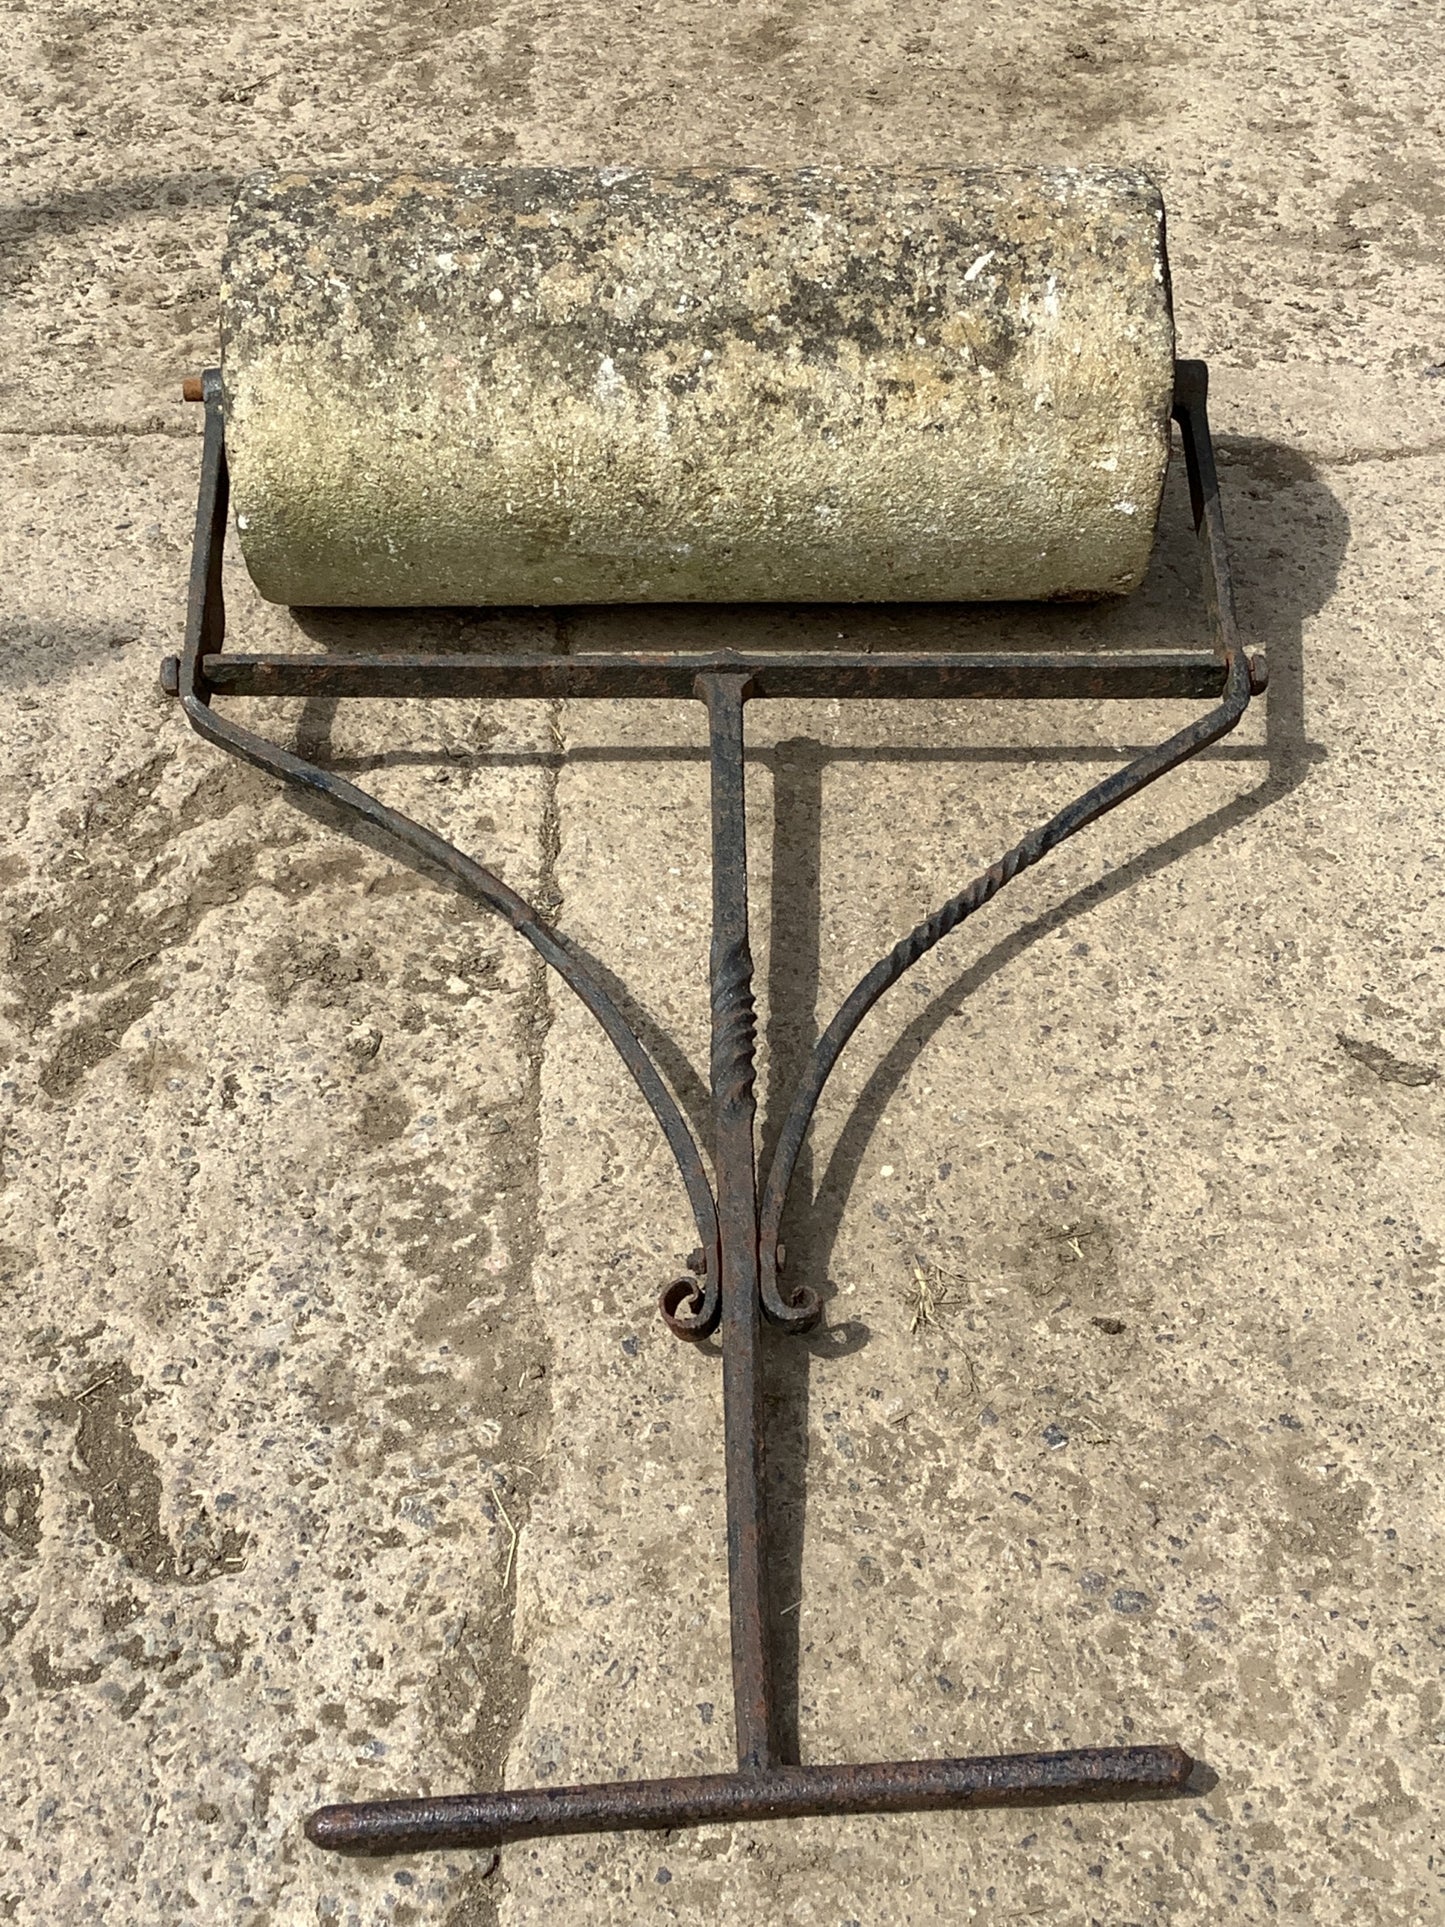 Victorian Heavy Stone Garden Lawn Roller With Wrought Iron Handle 4'3"H 2'6"x W